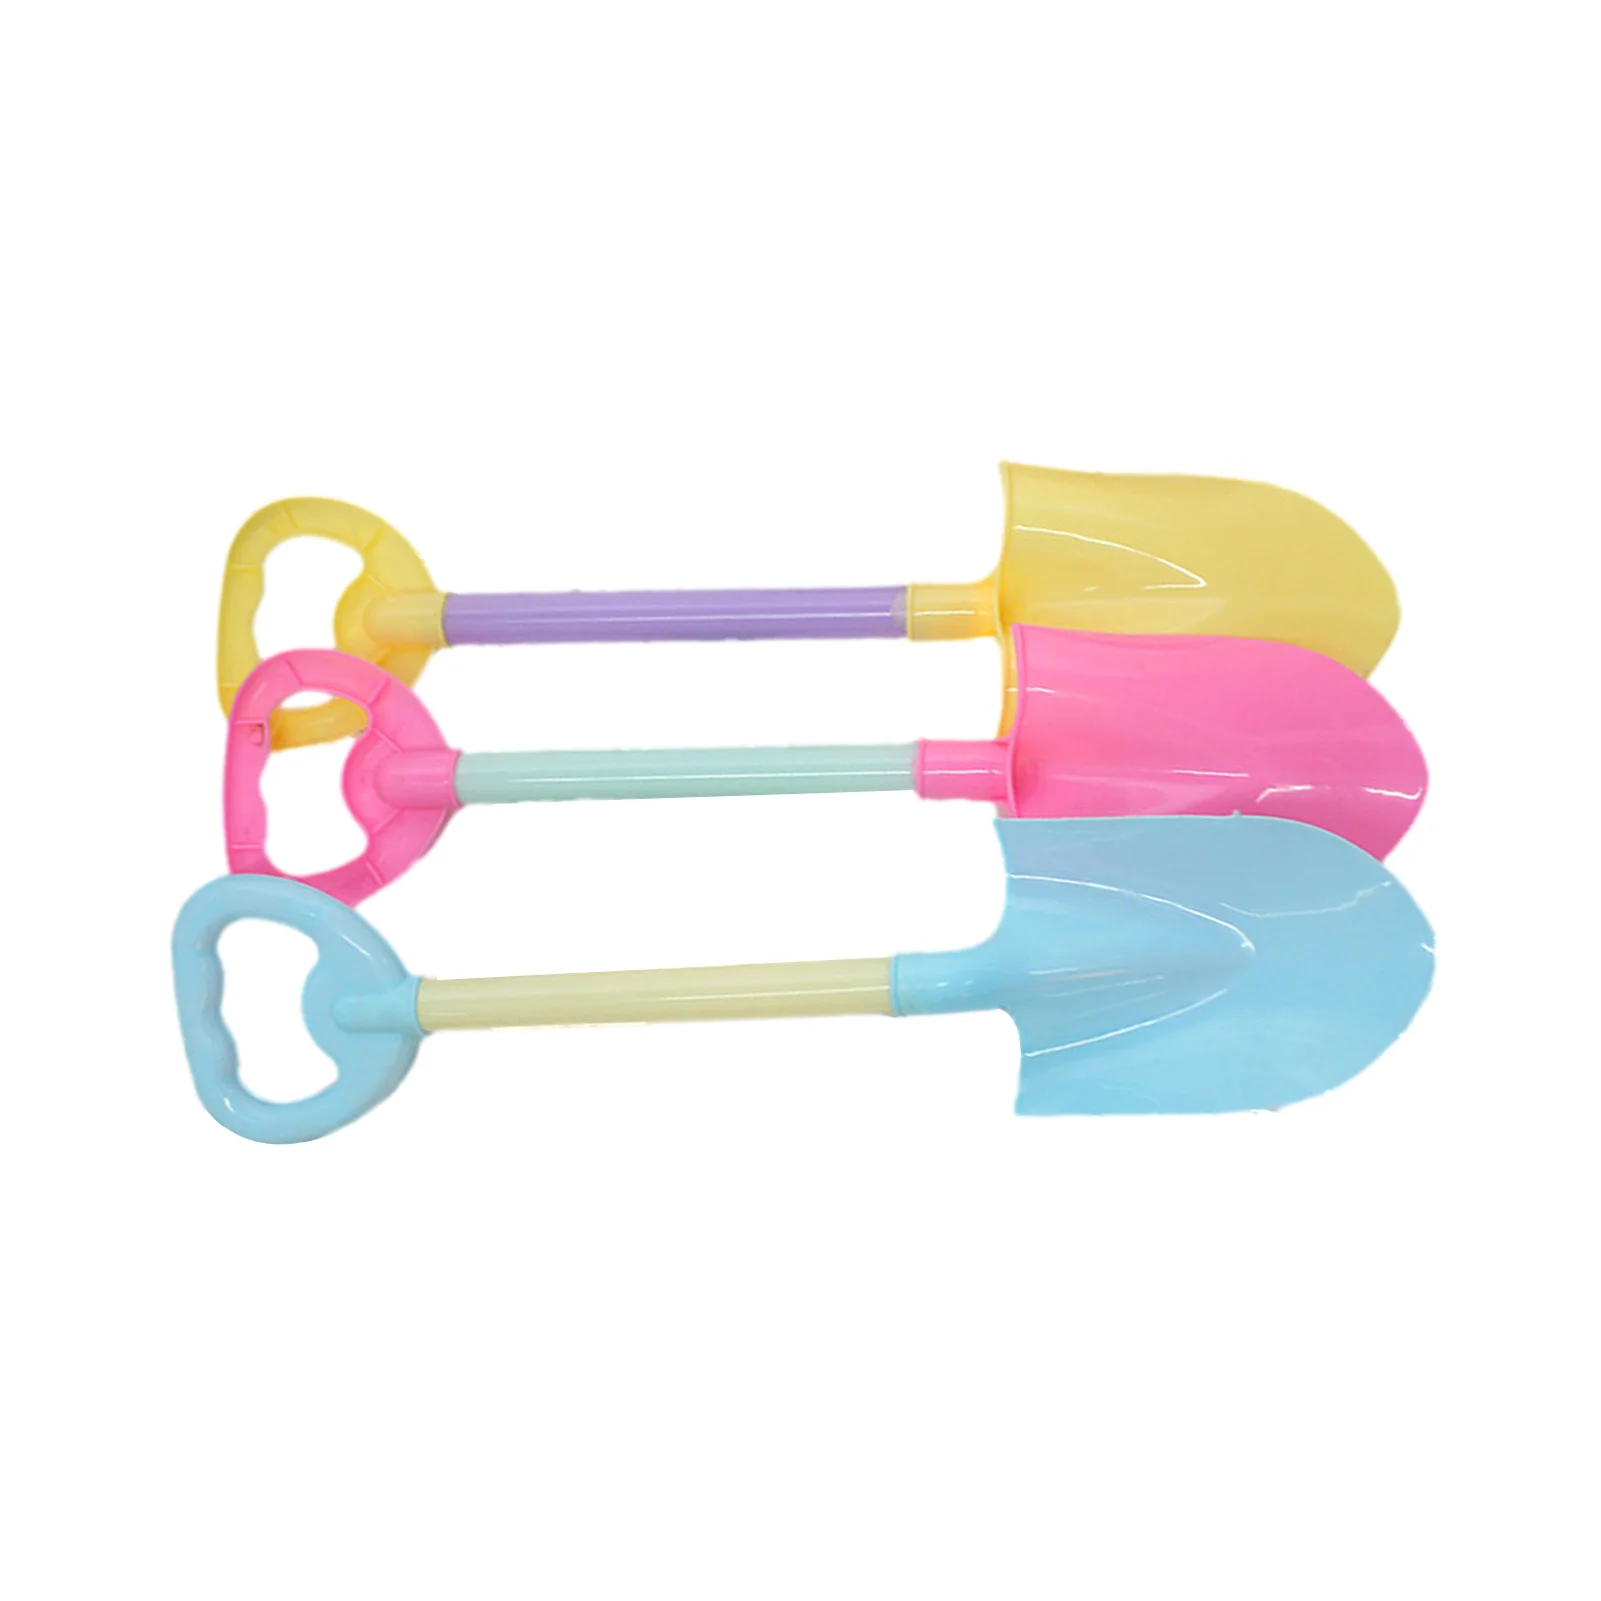 1PC Beach Sand Shovel Toys Safe Plastic Spades Gardening Digging Tool Play Sand Tool Playing Shovels Light Weight Tool Beach Toy